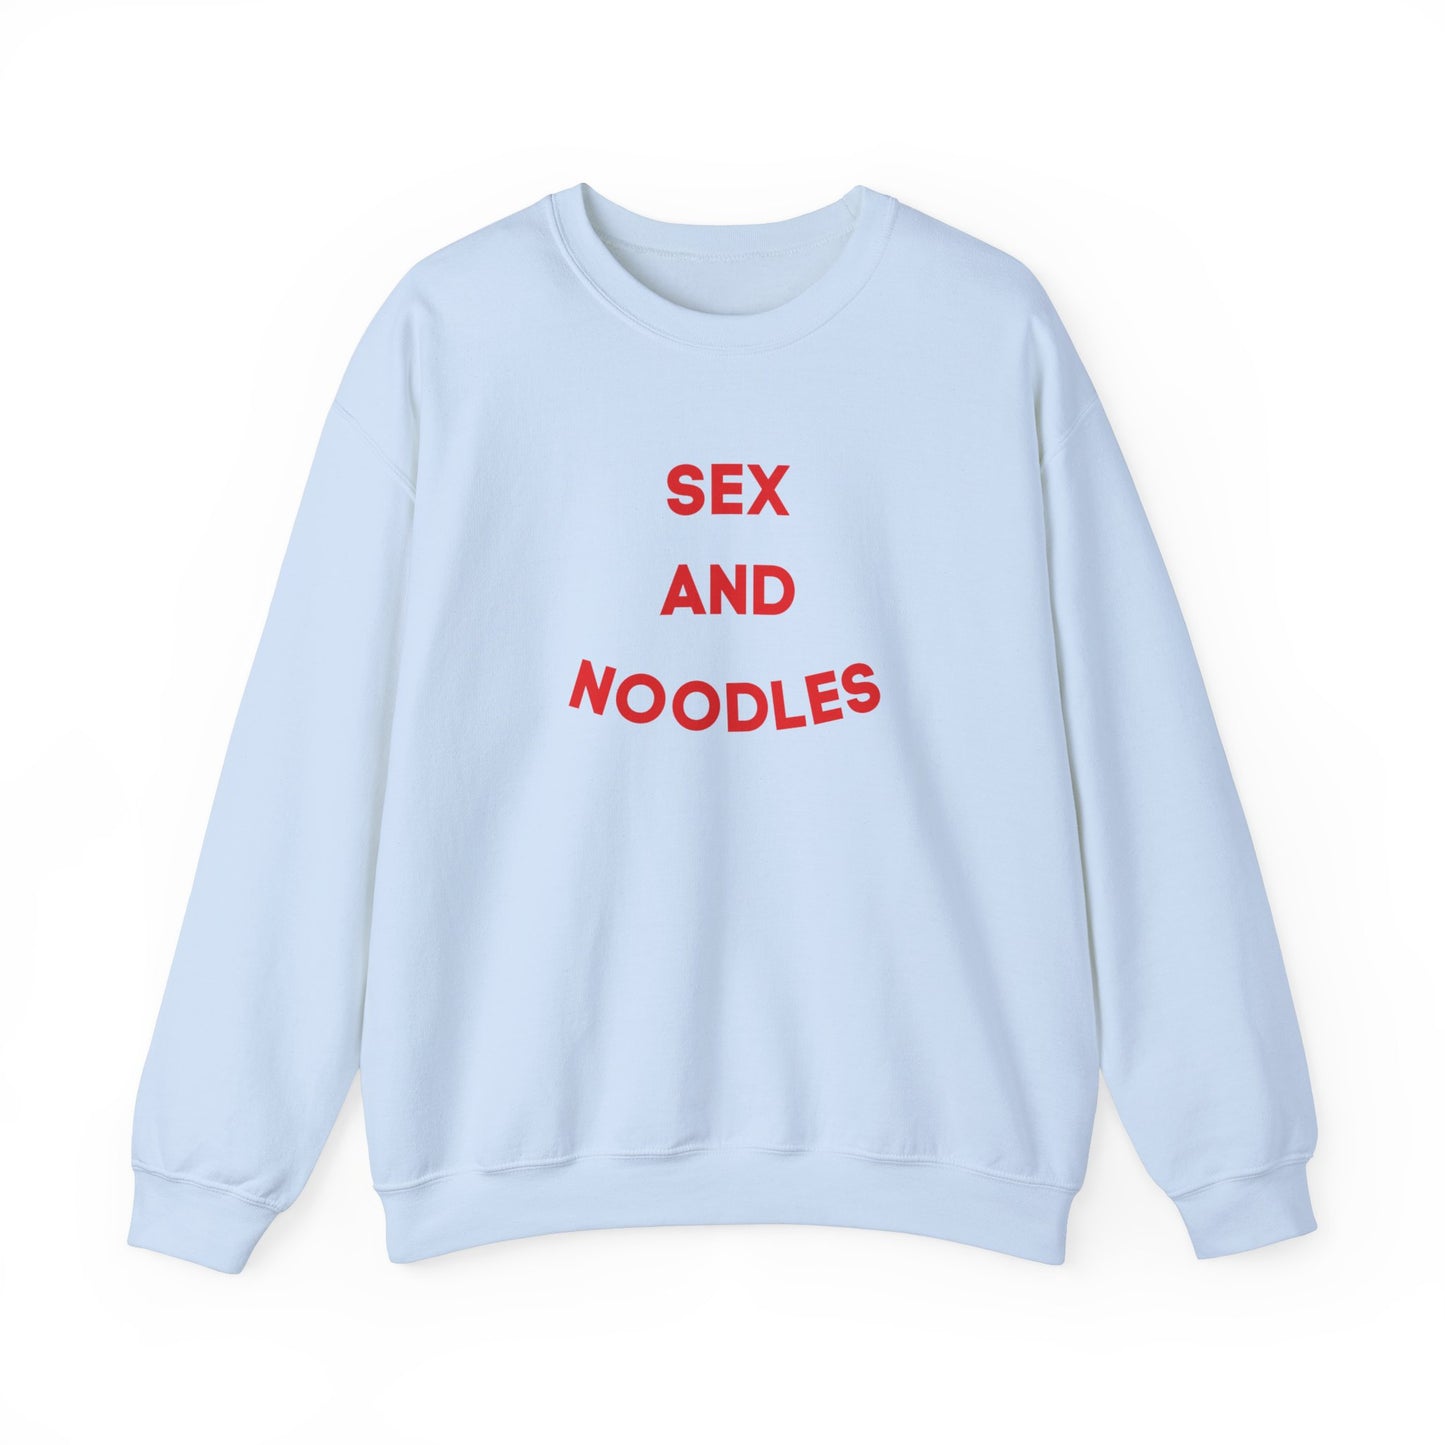 SEX AND NOODLES SWEATER